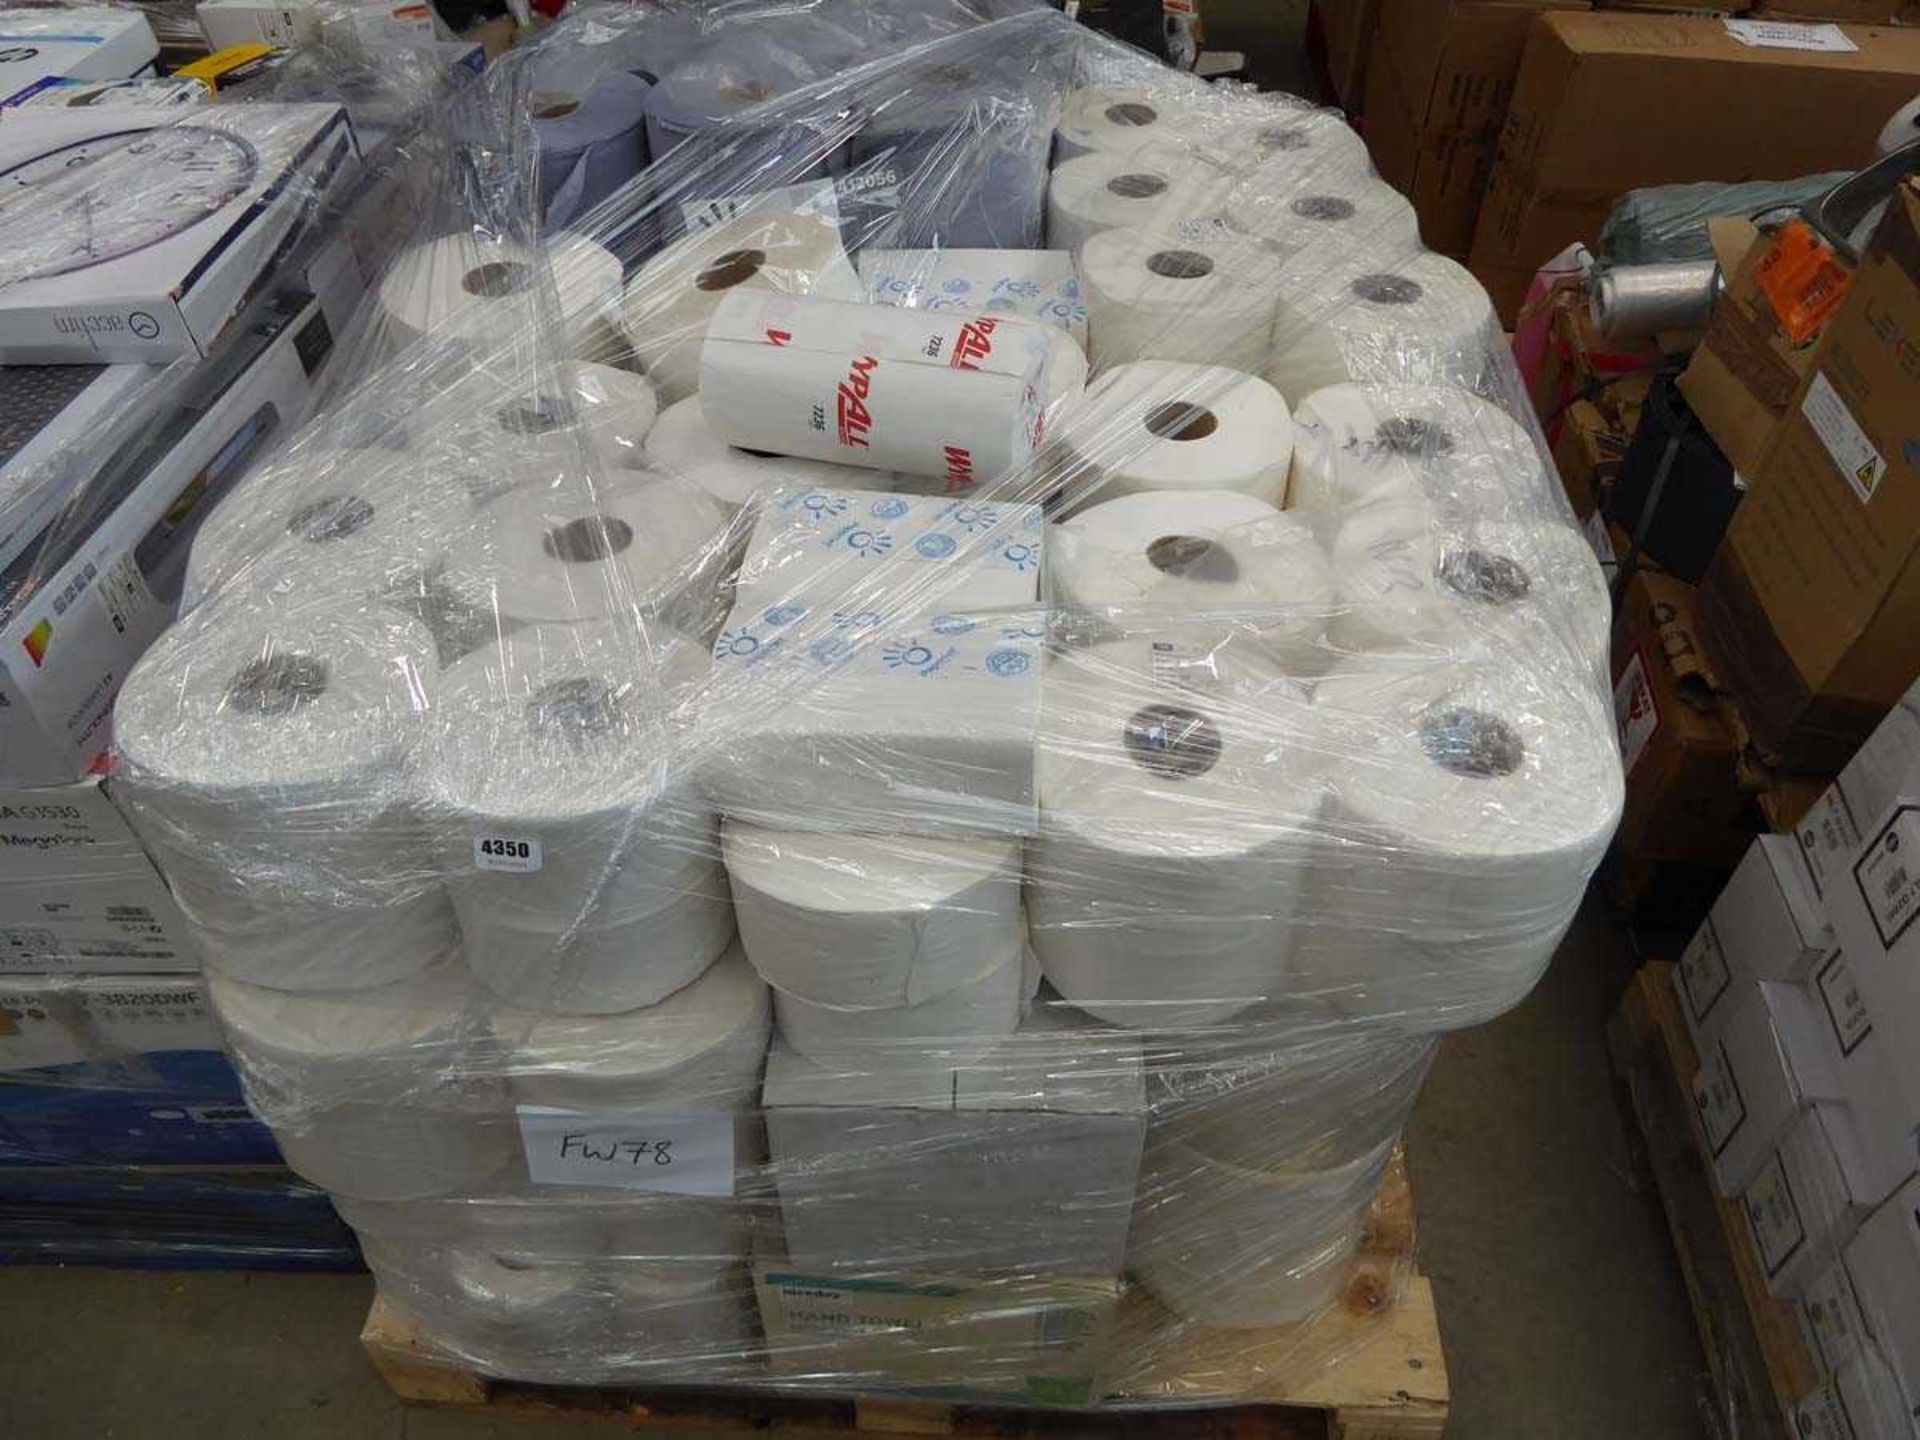 Pallet of paper towels and white and blue roll